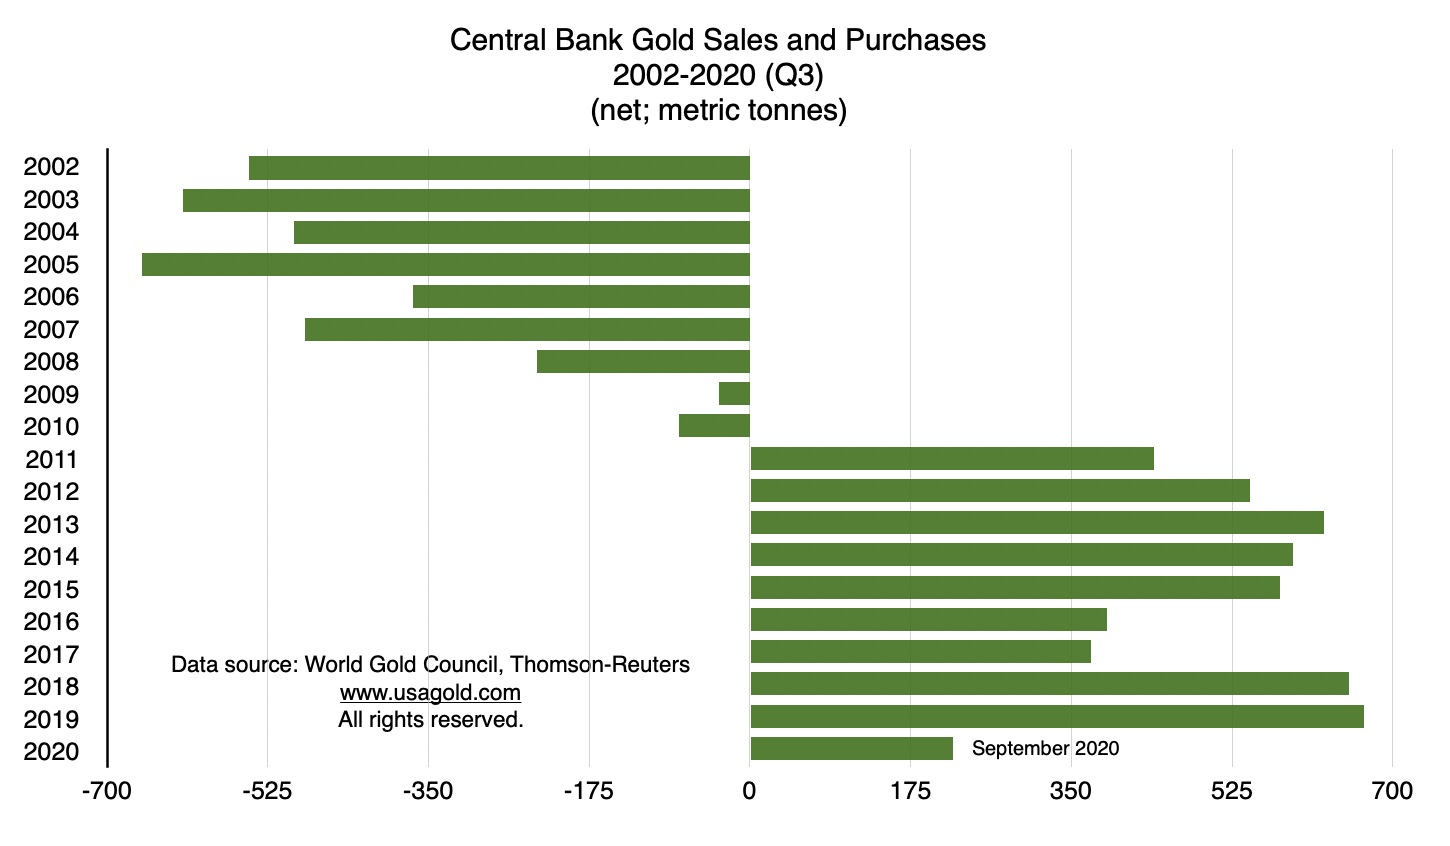 bar chart showing central bank gold sales and purchases 2002 -2020